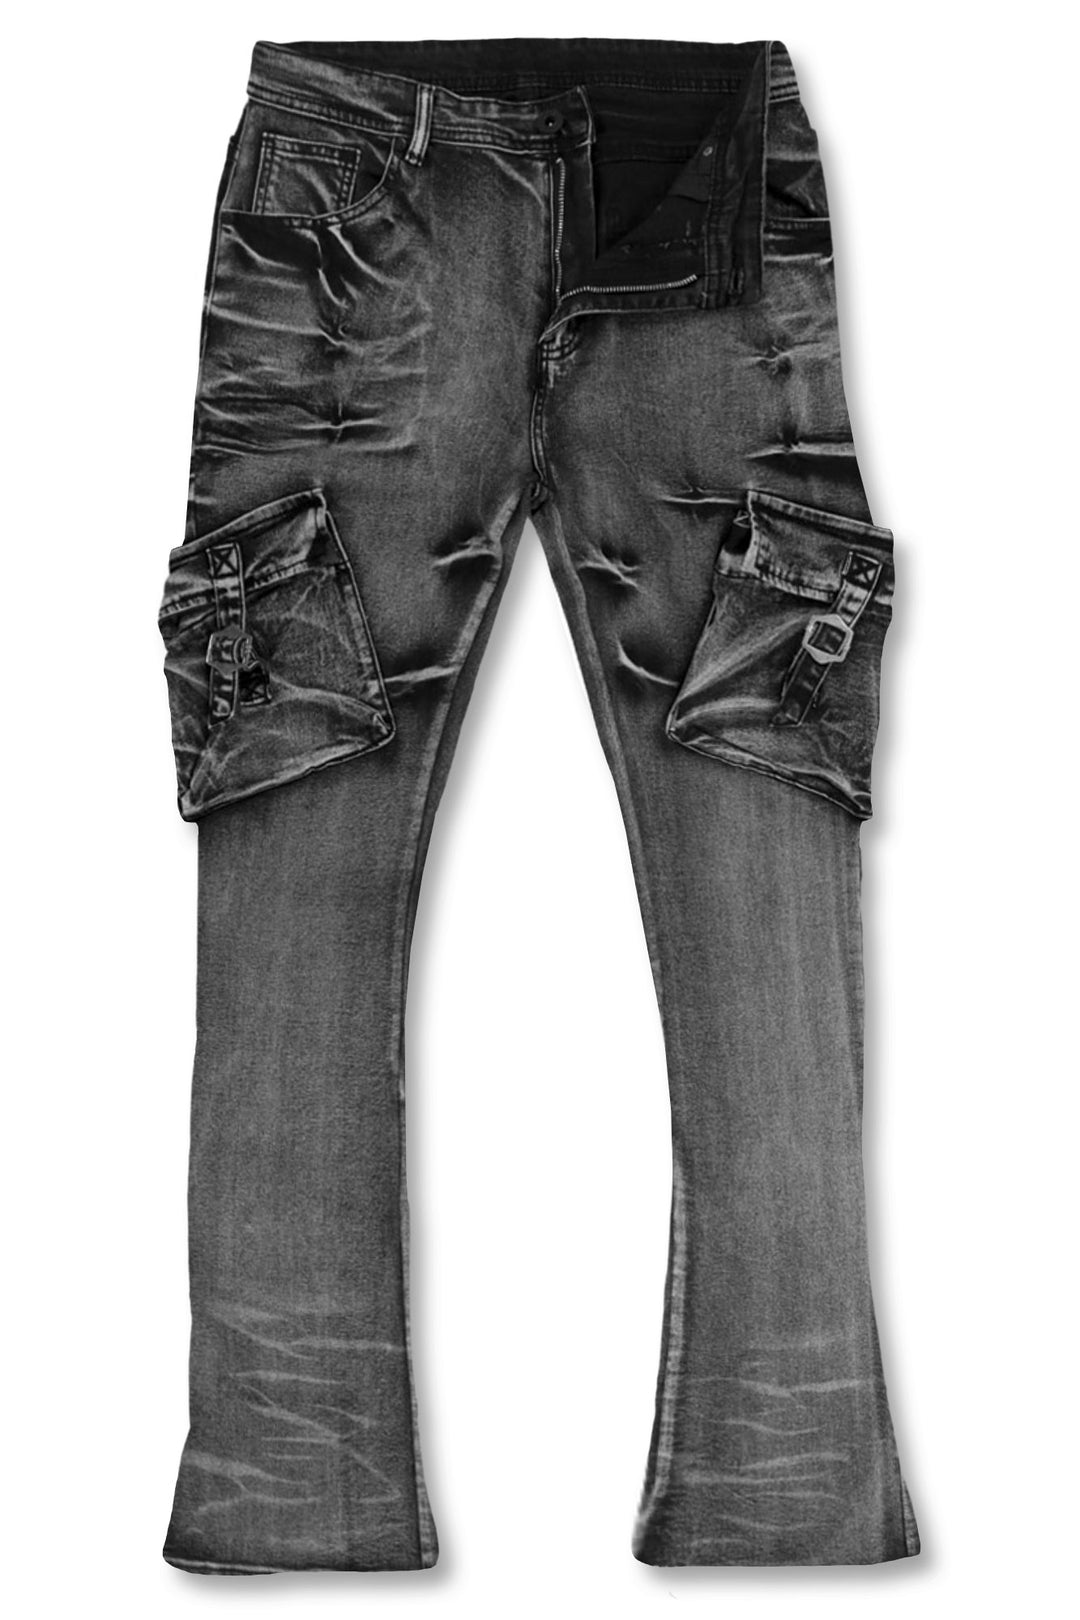 Check Out Stacked Slim Flare Cargo Jeans - Black Wash